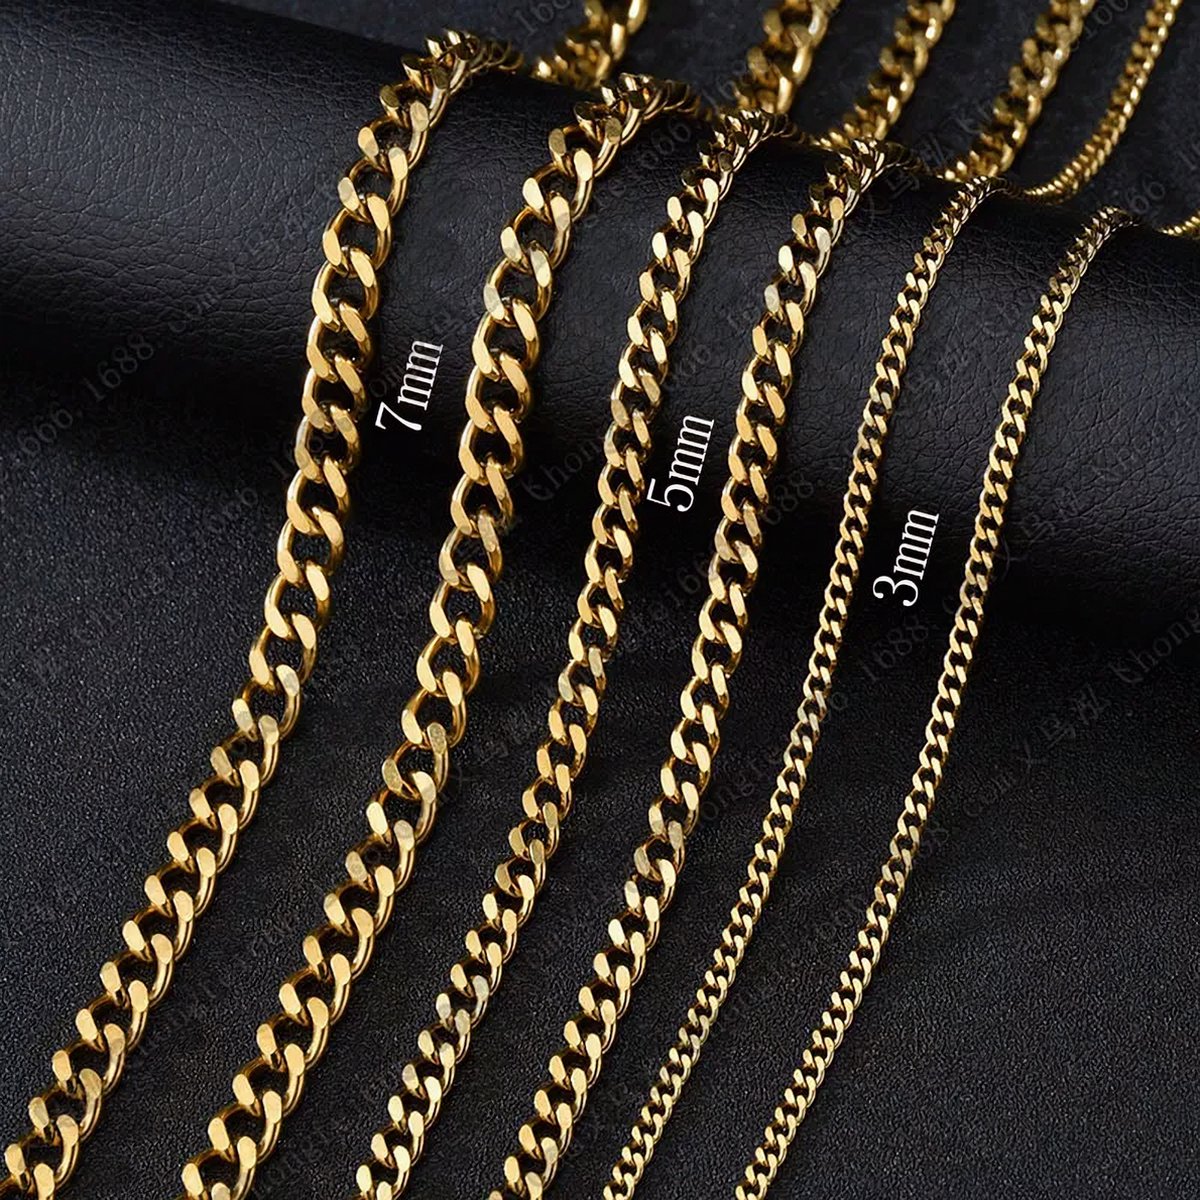 ICYBOY 18K Curb Cuban Basis Ketting [BLACK GOLD PLATED] [50 cm] [7 mm] Link Chain Chokers Basic Punk Stainless Steel Necklace Vintage Black Gold Tone Solid Metal